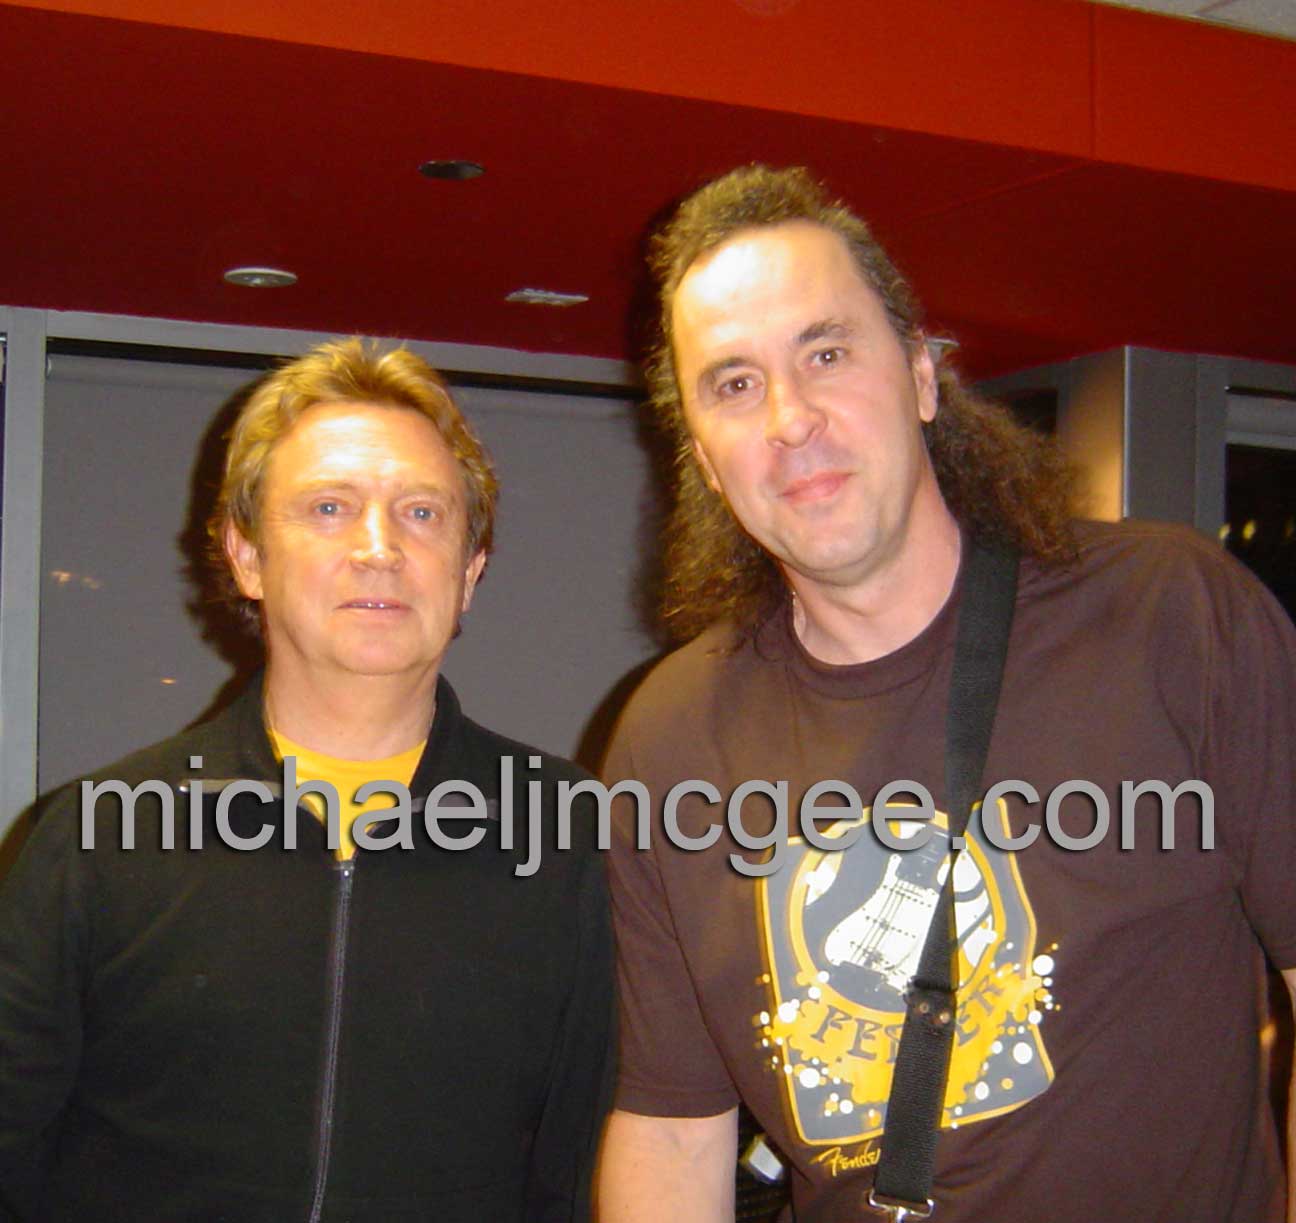 Andy Summers / michaeljmcgee.com